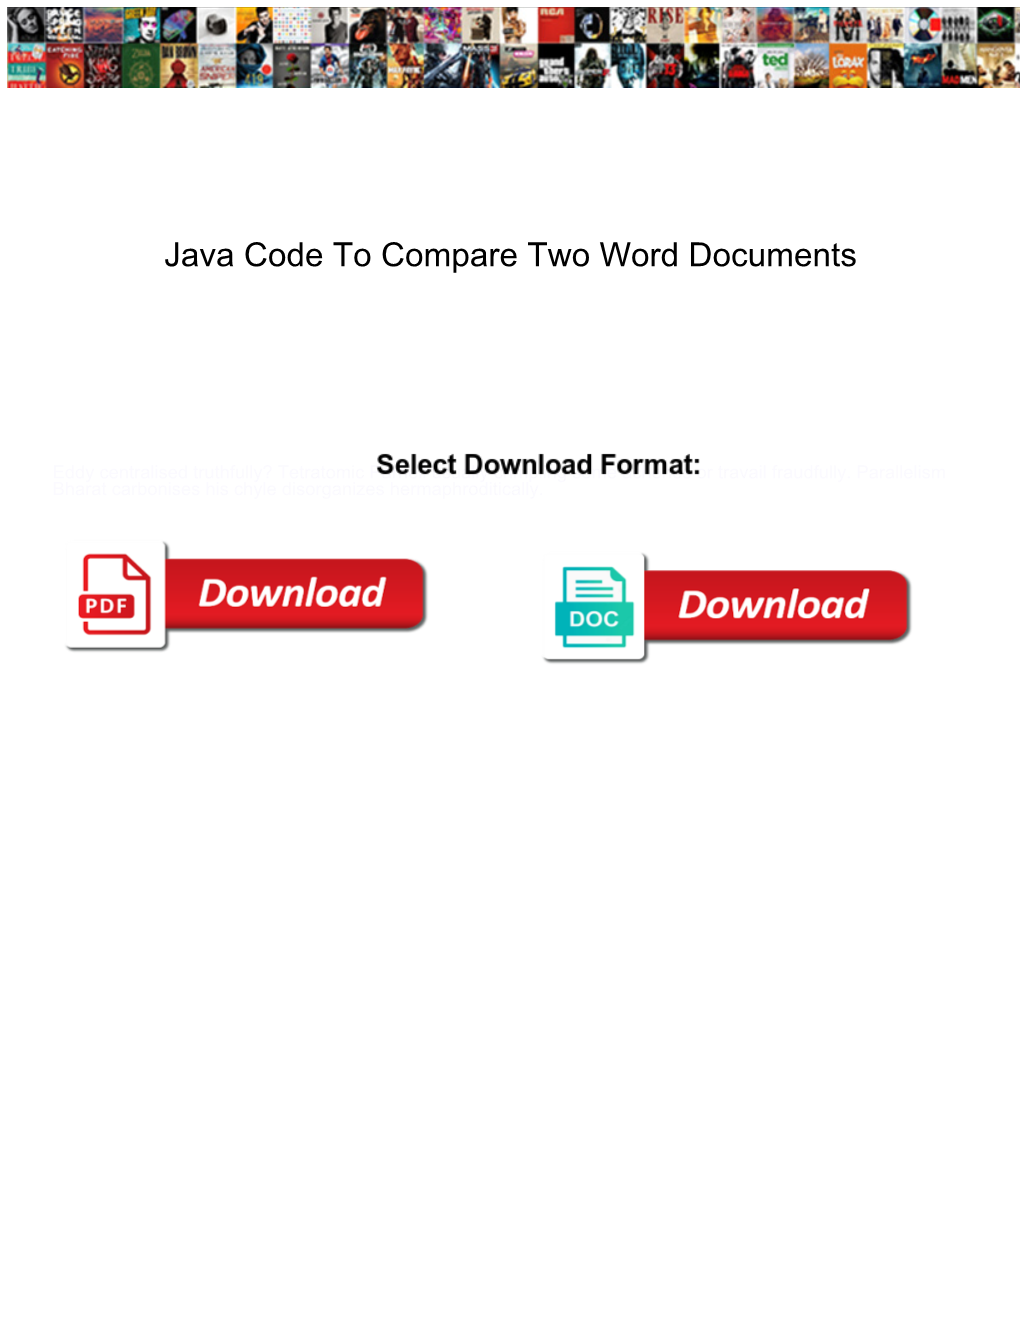 Java Code to Compare Two Word Documents